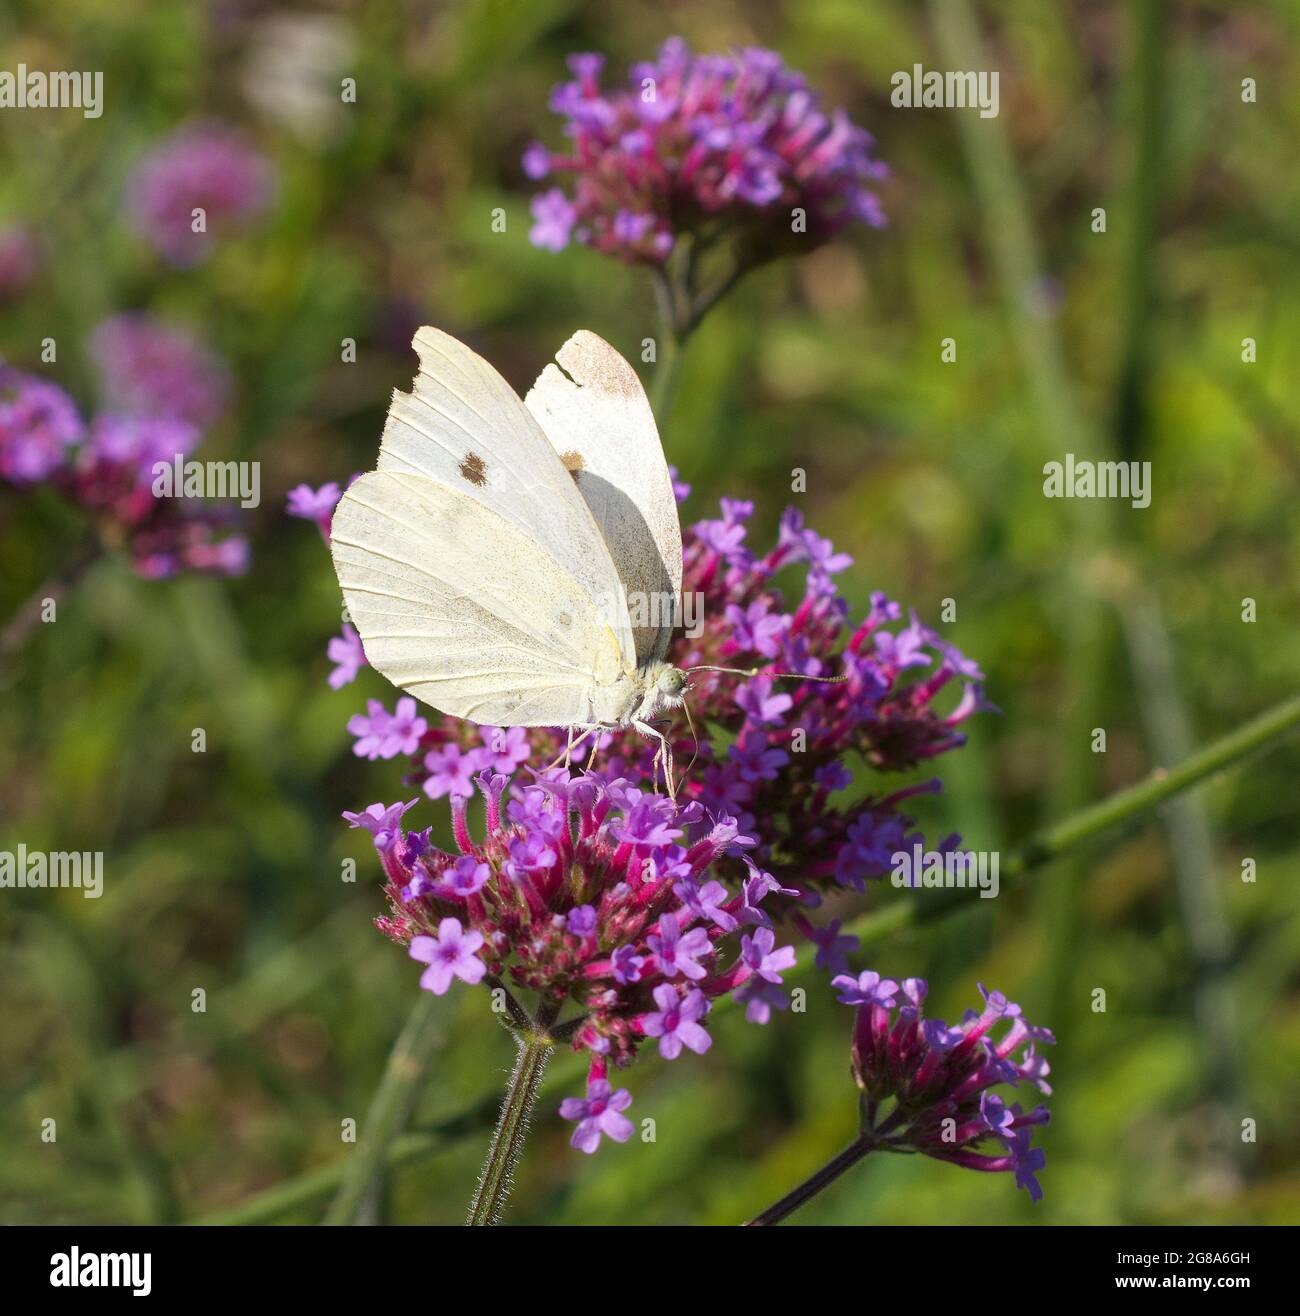 Pieris brassicae, the Large White, female of strong flying butterfly feasting on a purple blossom of milkweeds. Stock Photo